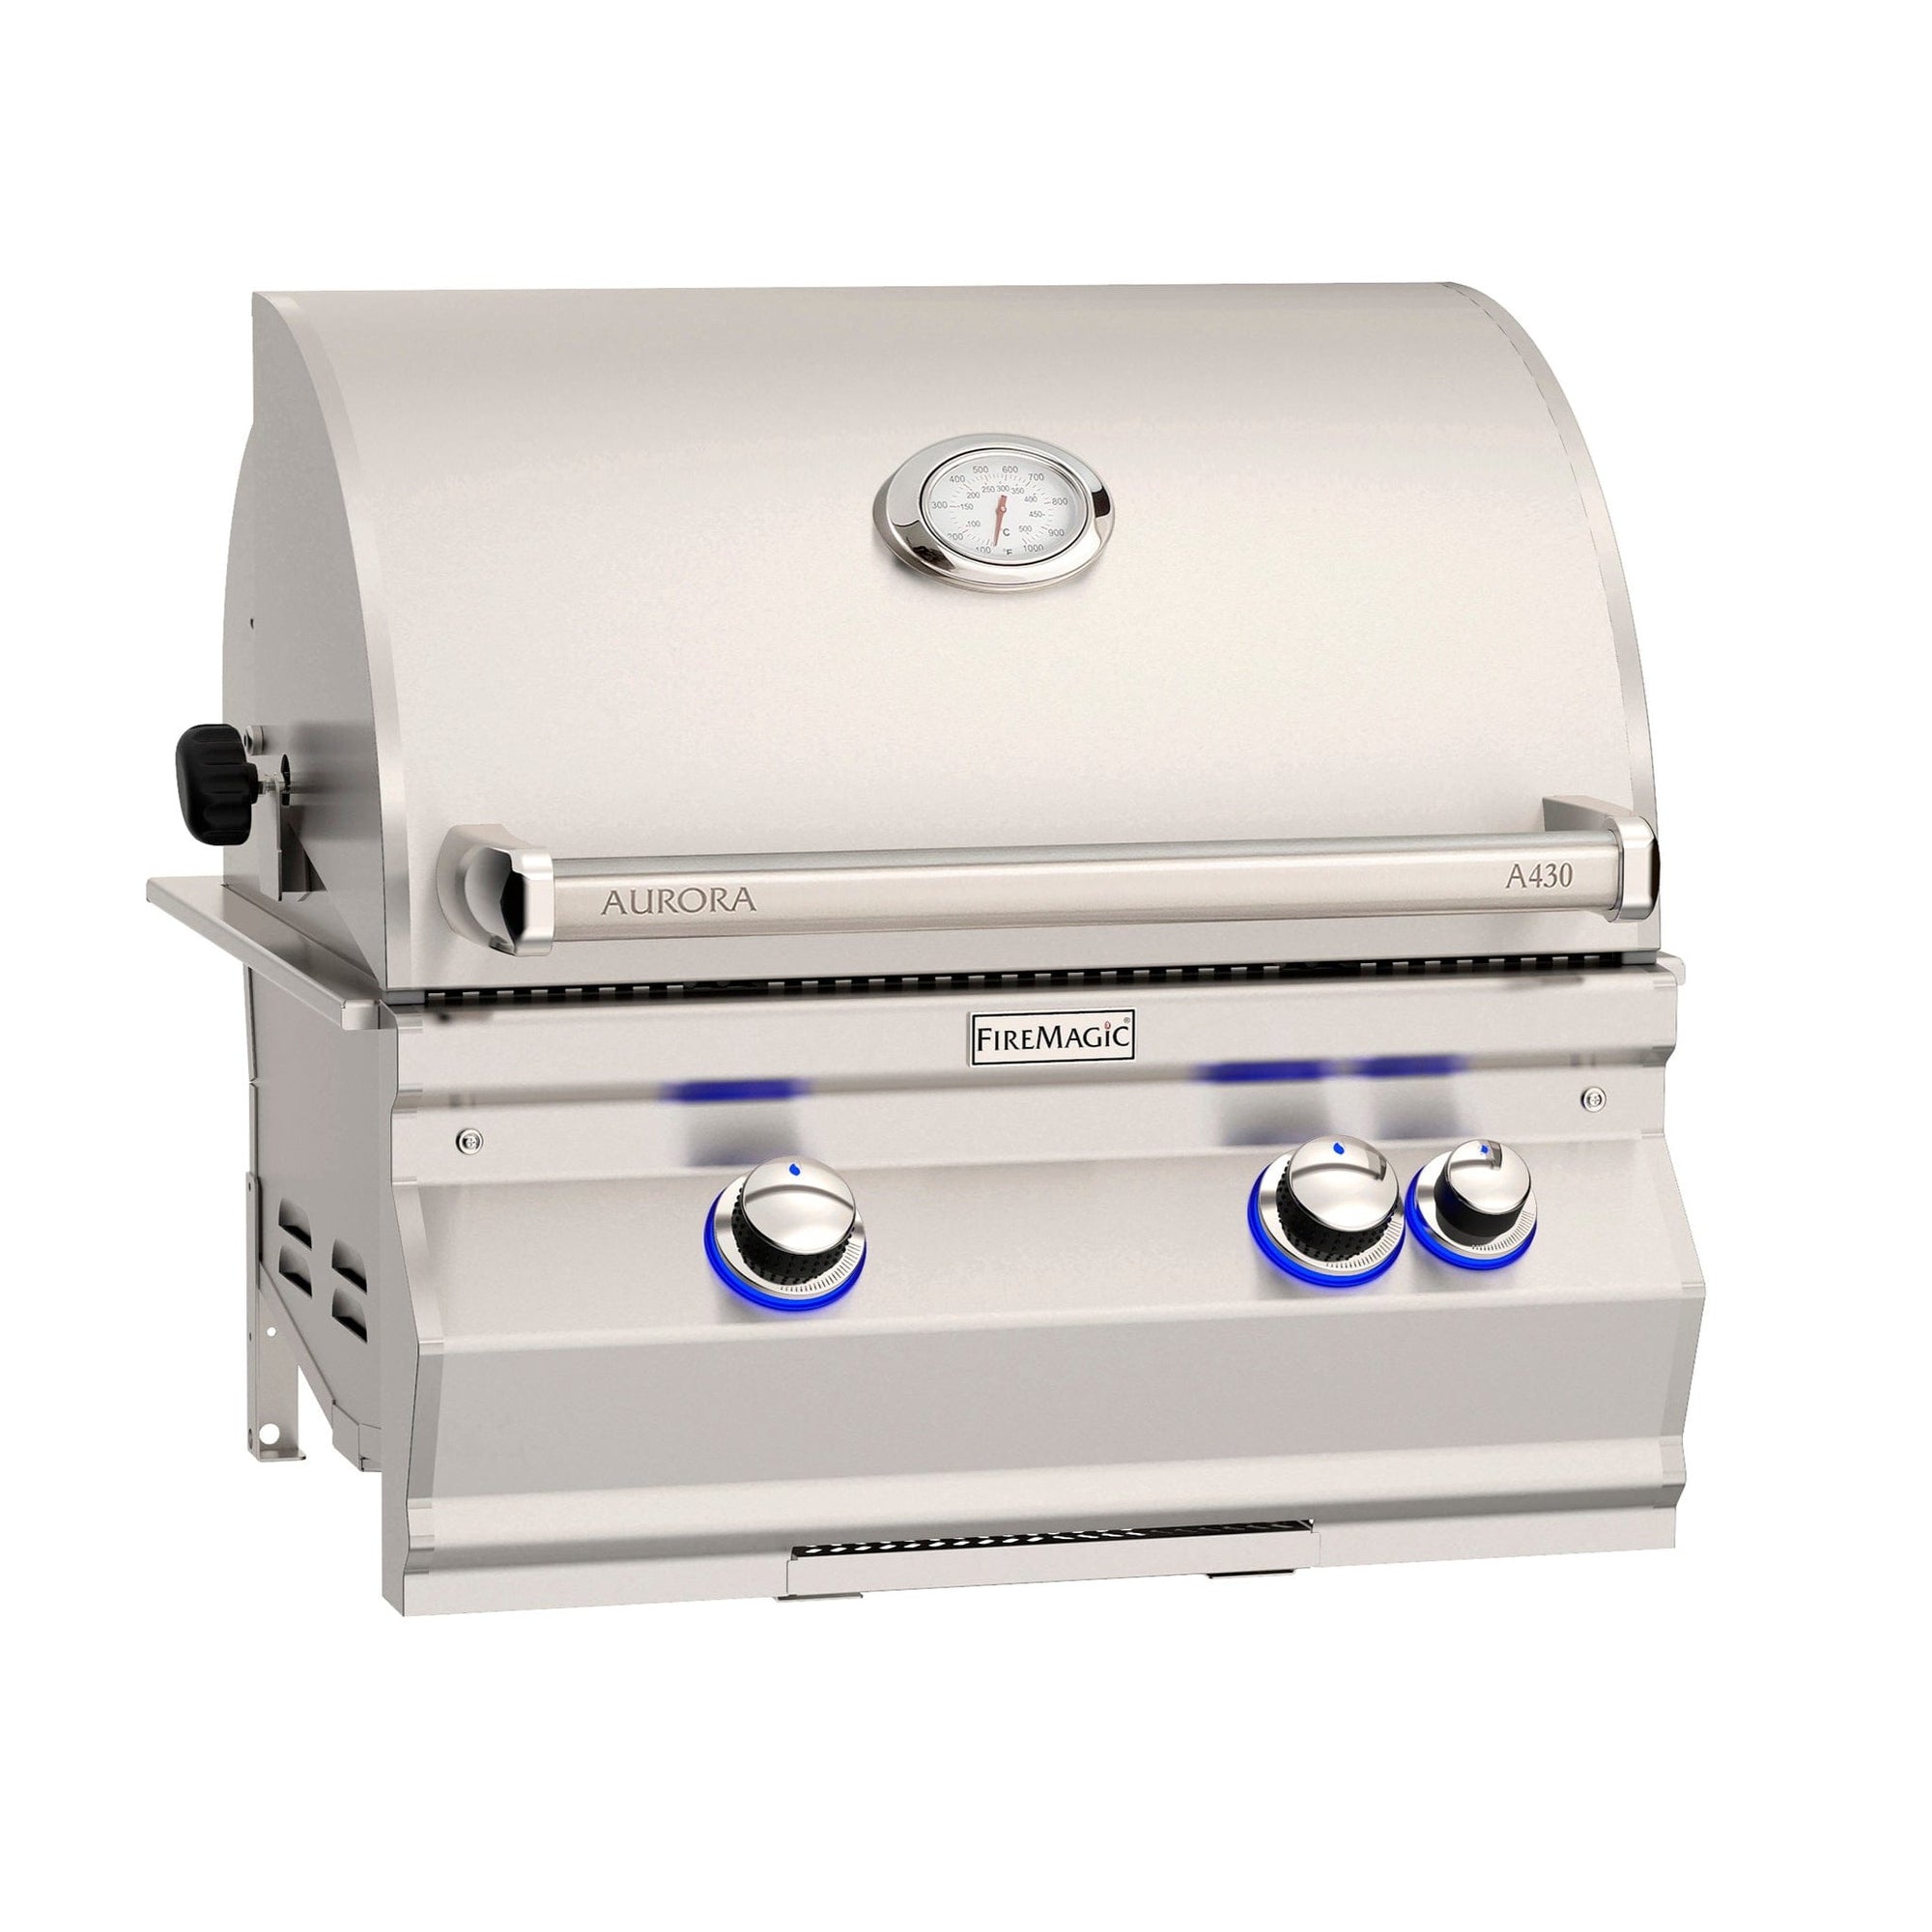 Firemagic Grills Fire Magic Aurora 24" Built-In Grill with Analog Thermometer / A430i